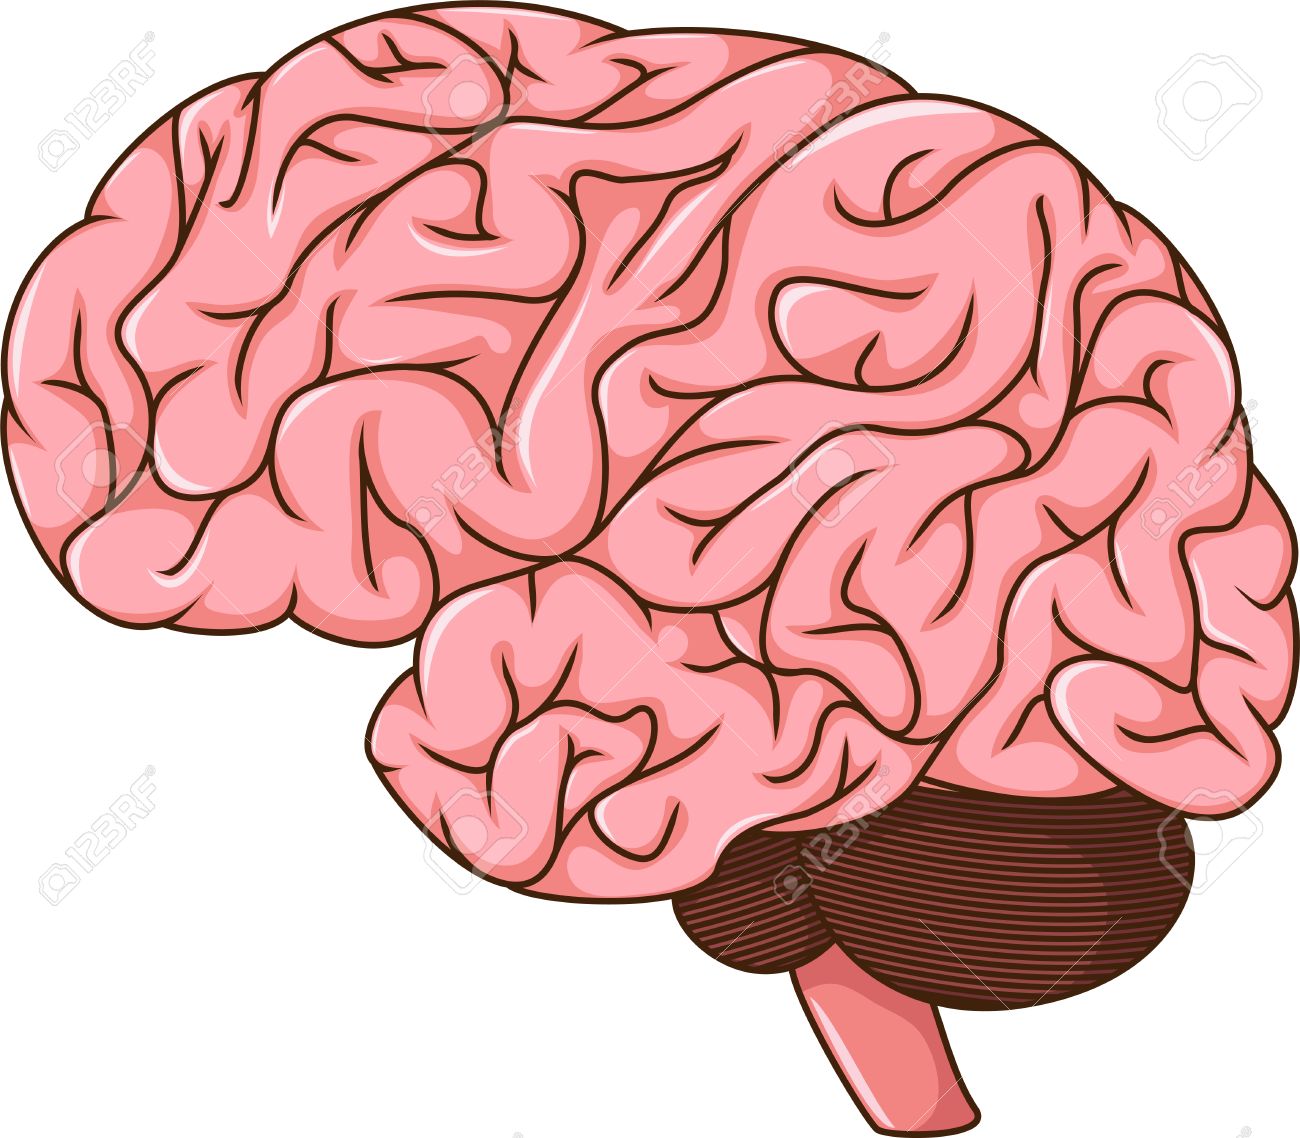 human brain pictures clipart 10 free Cliparts | Download images on ...